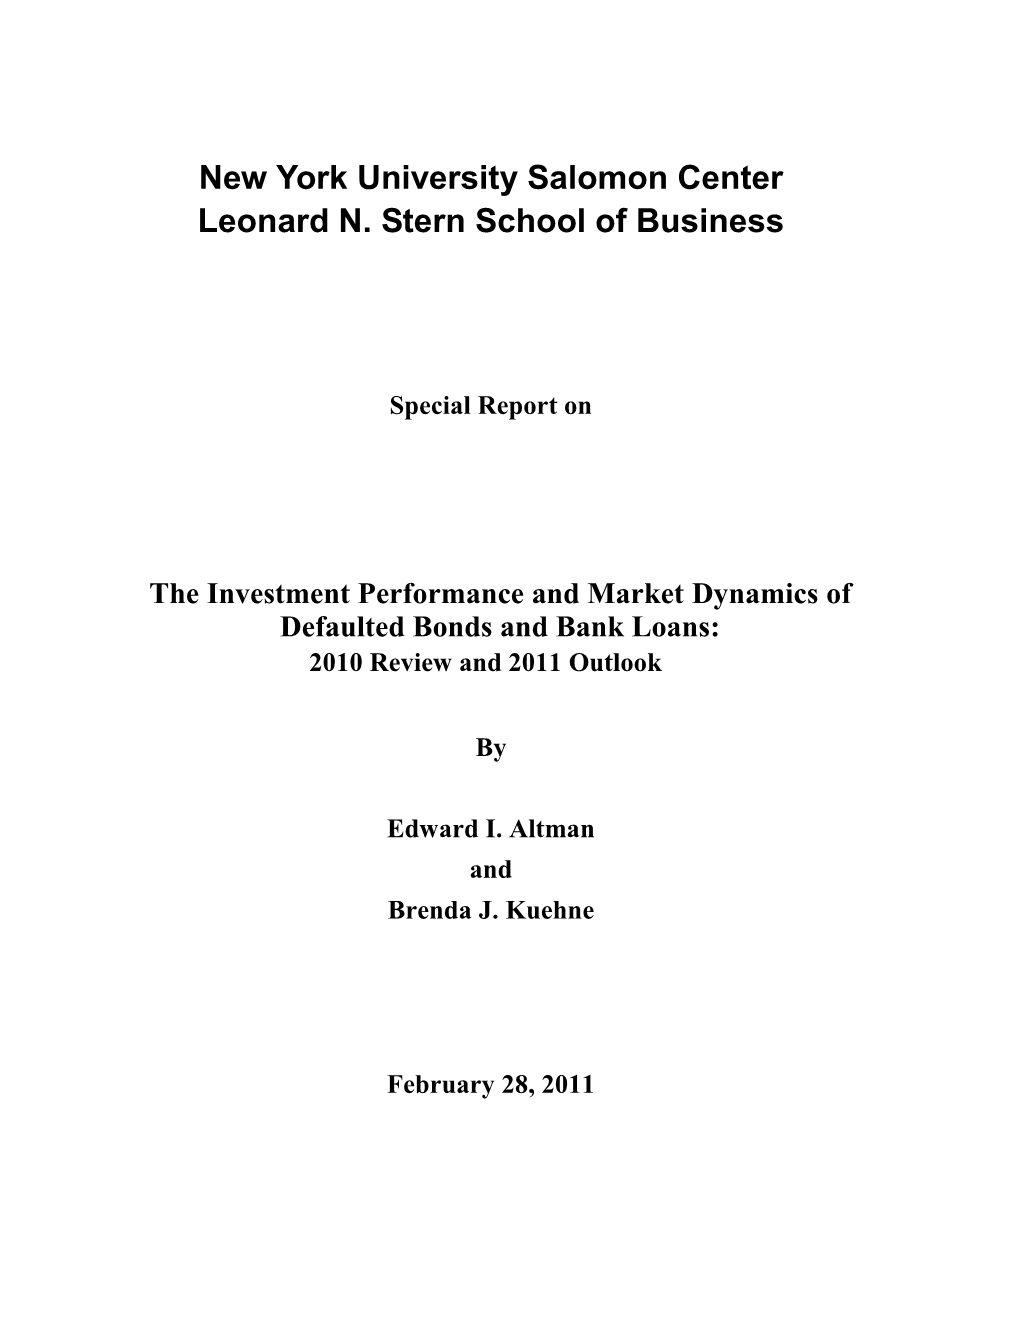 The Investment Performance and Market Dynamics of Defaulted Bonds and Bank Loans: 2010 Review and 2011 Outlook